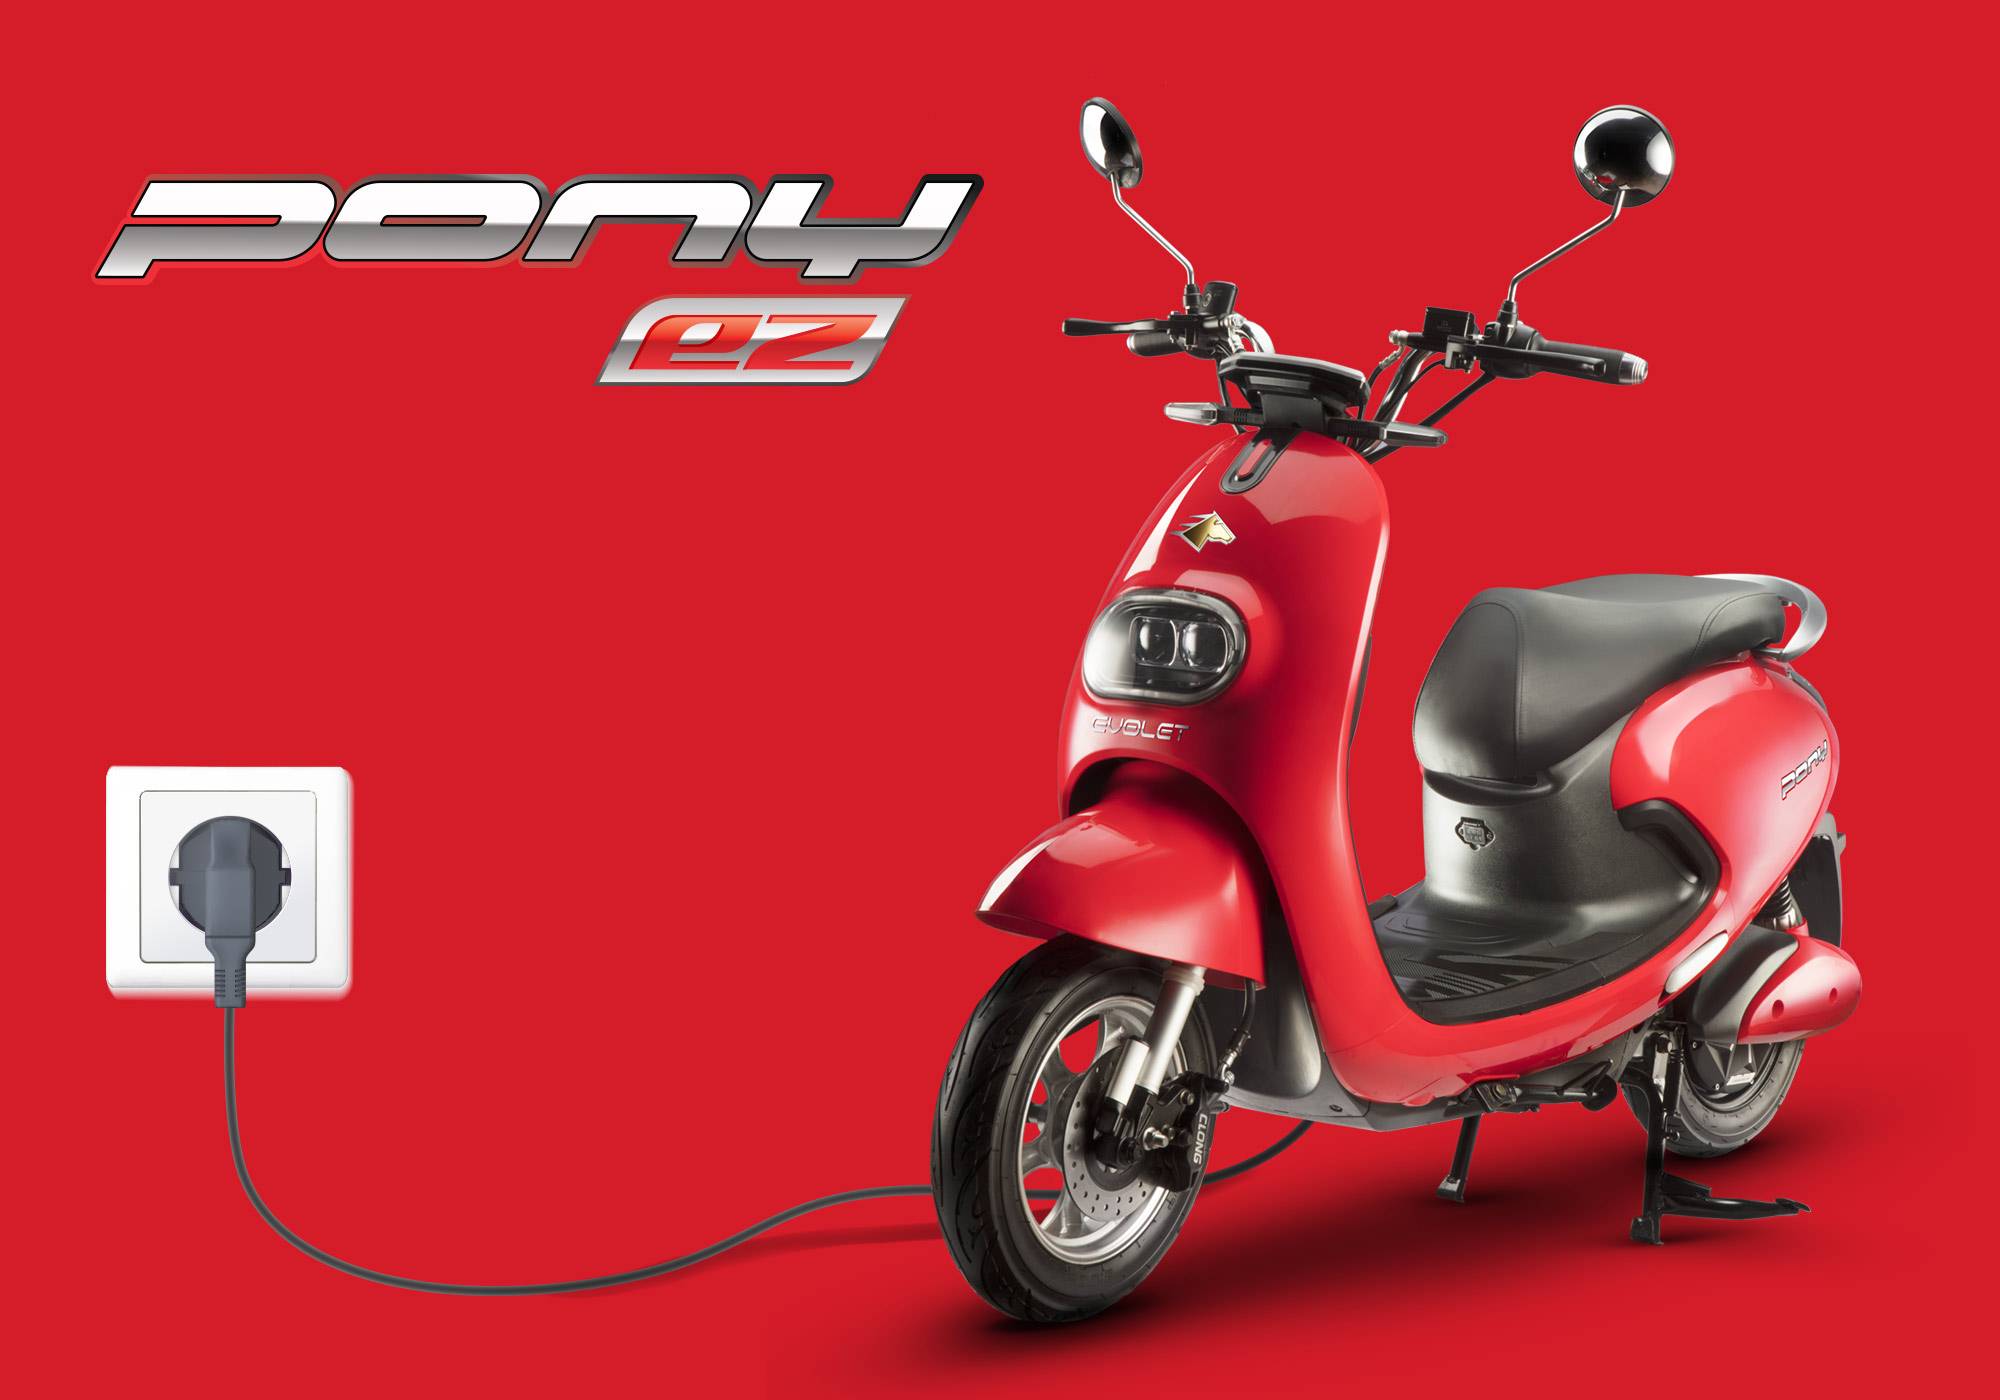 EV, Ola Electric Scooter, Low Cost E-scooter, Evolet Pony EZ, Ampere V 48, Ujaas eZy, Ujaas Ego Al, electric scooter price